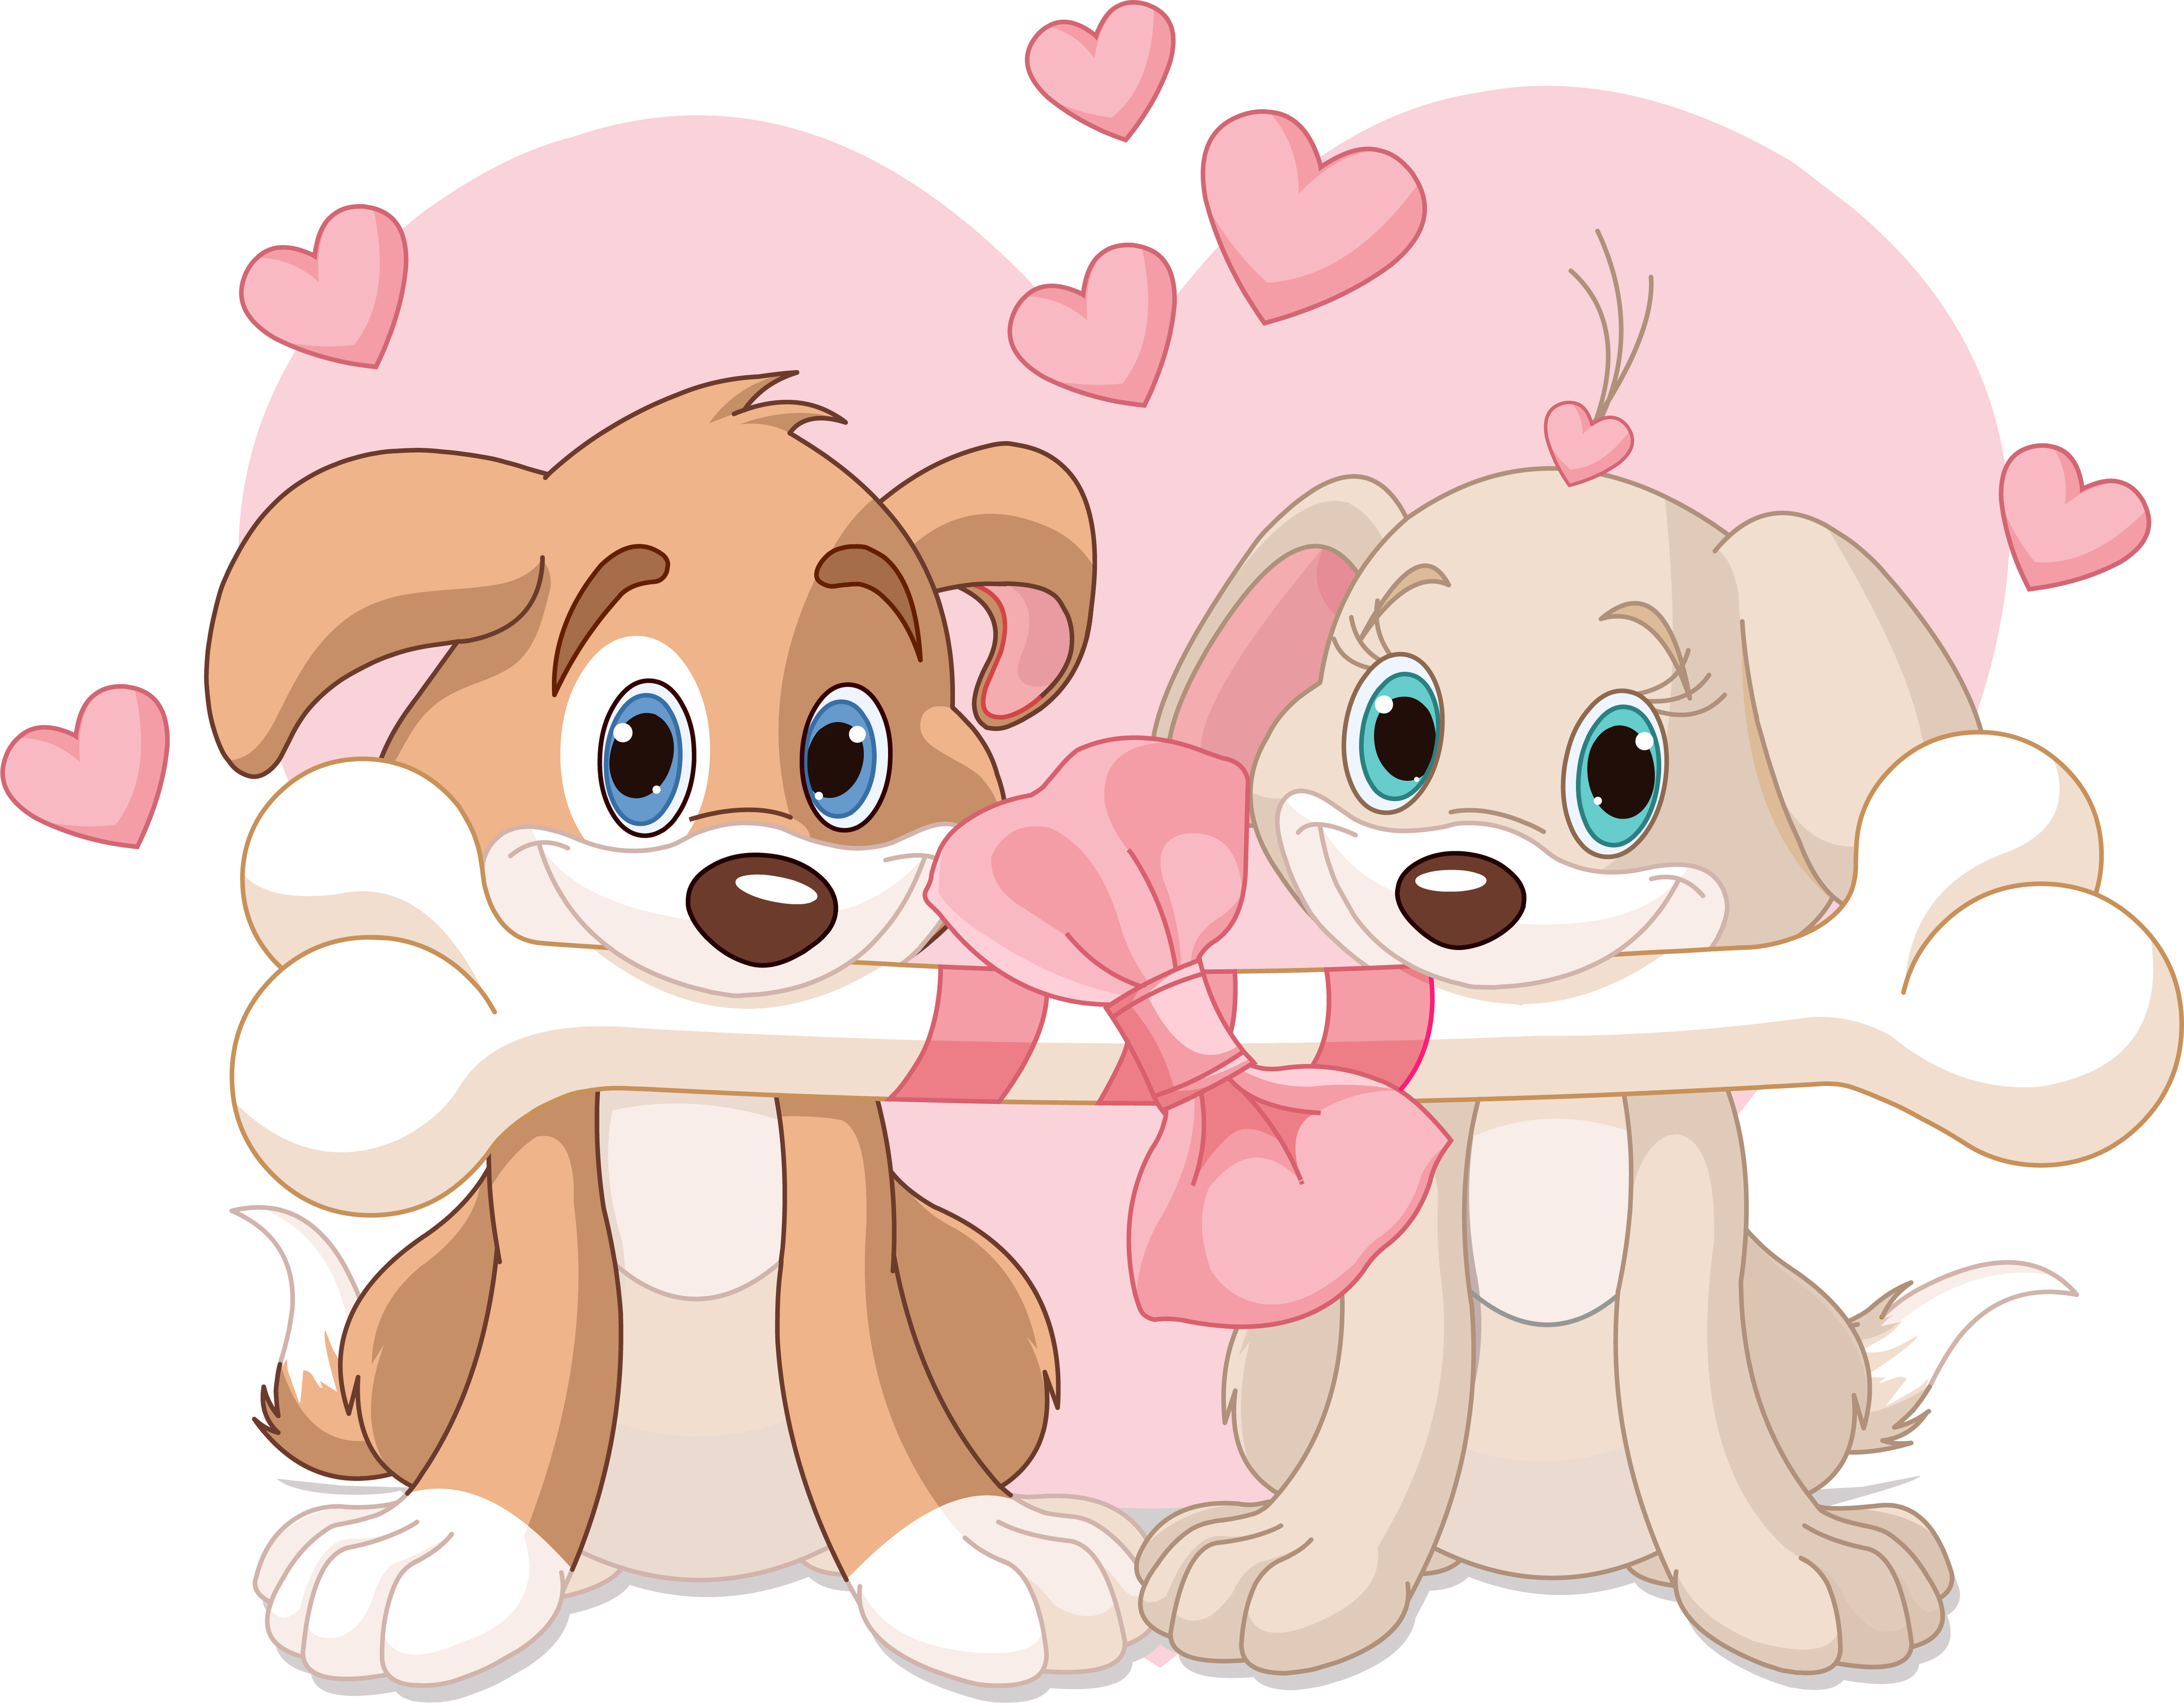 Dogs and Valentine's Day